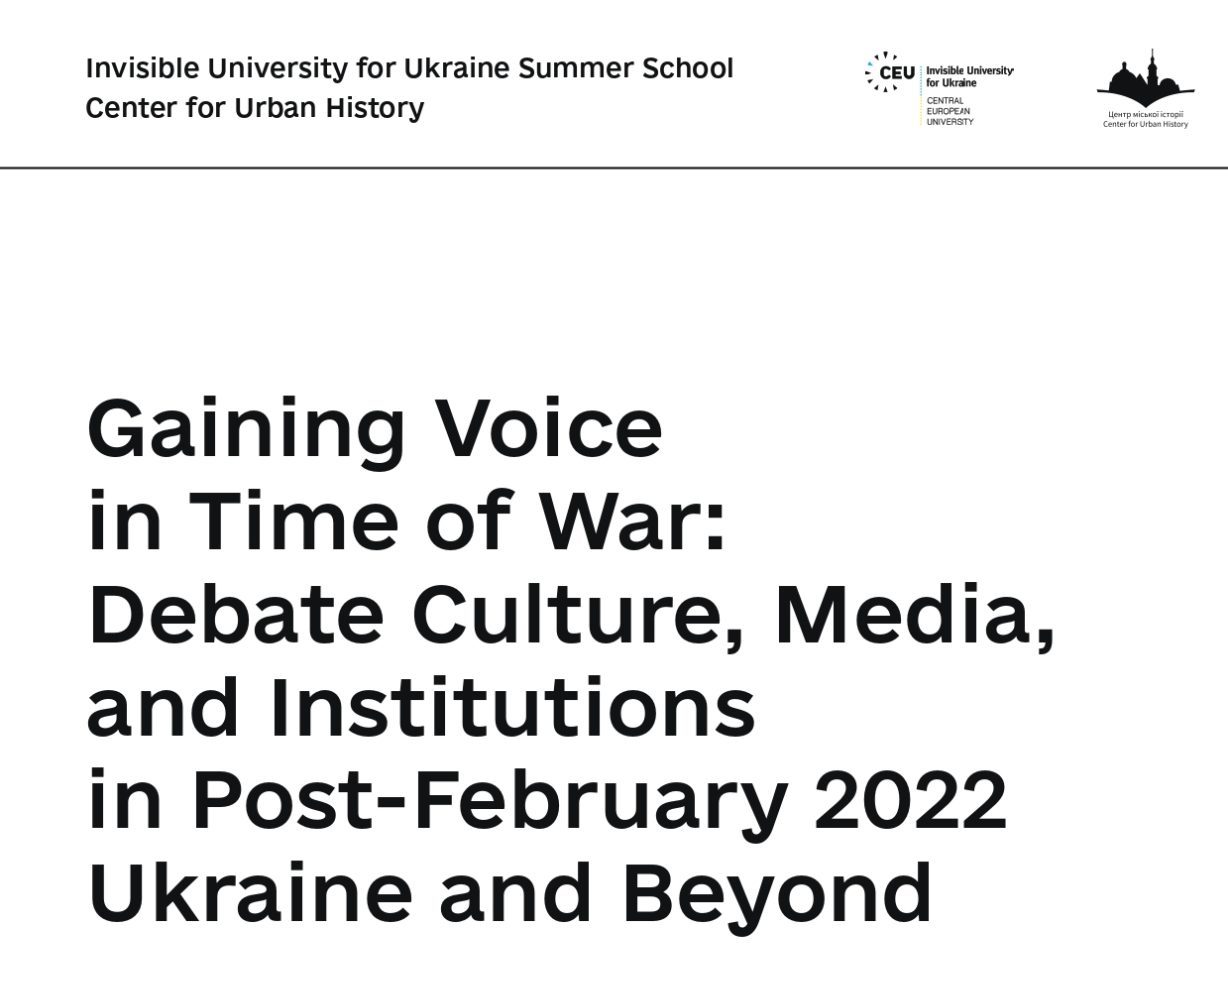 Gaining Voice in Time of War: Debate Culture, Media, and Institutions in Post-February 2022 Ukraine and Beyond